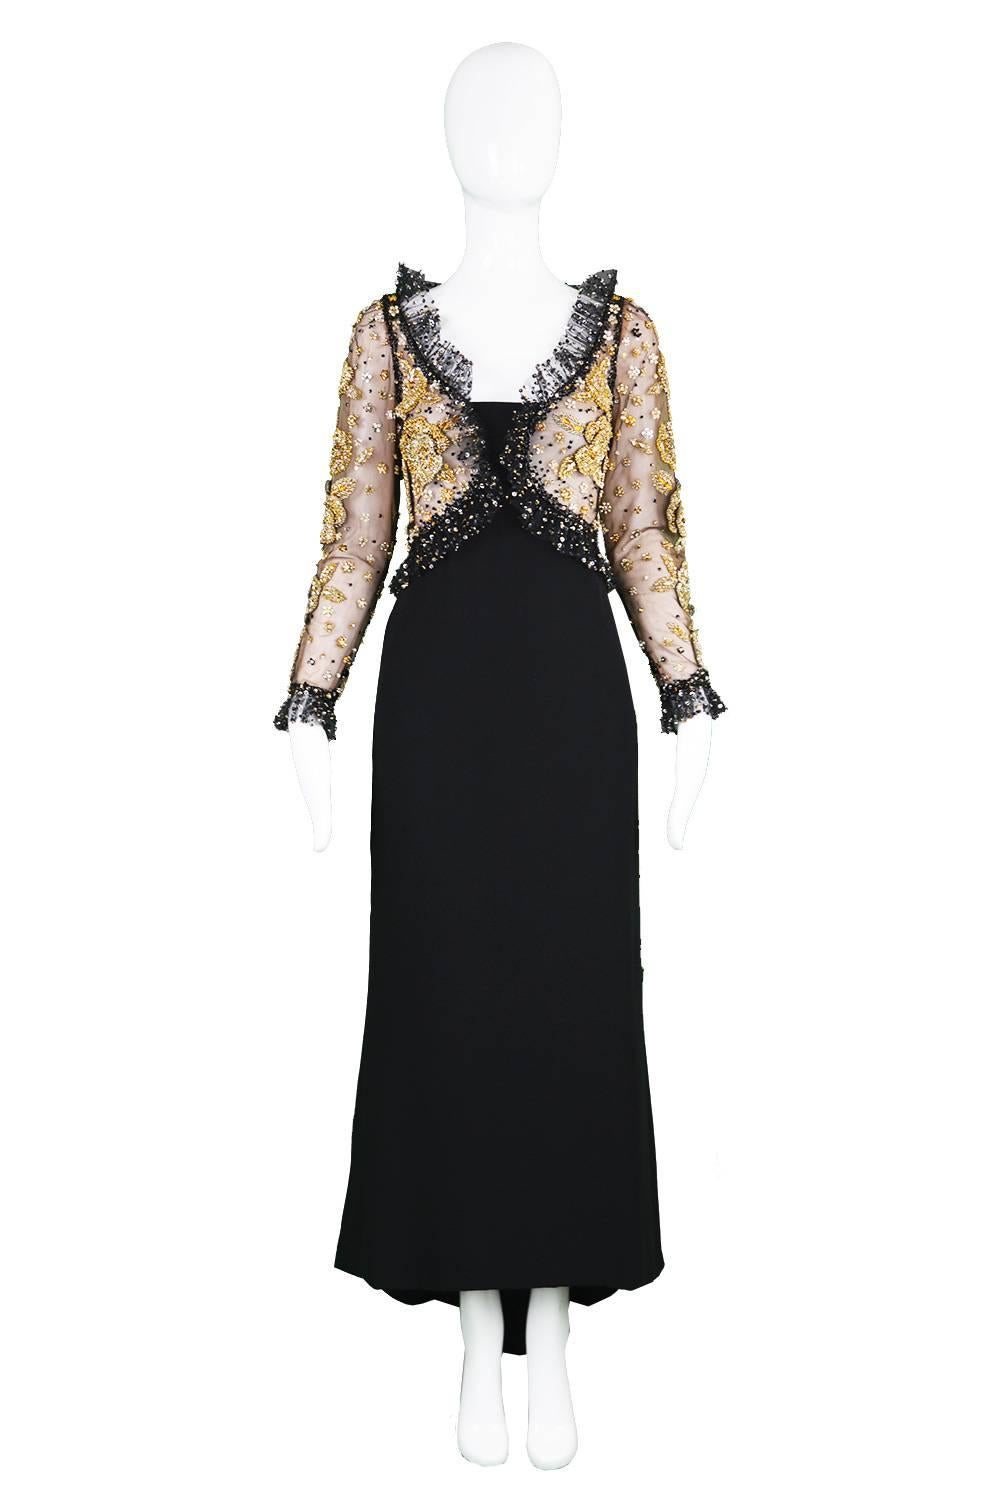 An insanely sexy vintage evening gown from the 1990s by Italian couturier and genius designer, Renato Balestra. This red carpet worthy dress is heavily embellished with crystals and beads hand set onto sheer silk tulle with a nude silk chiffon